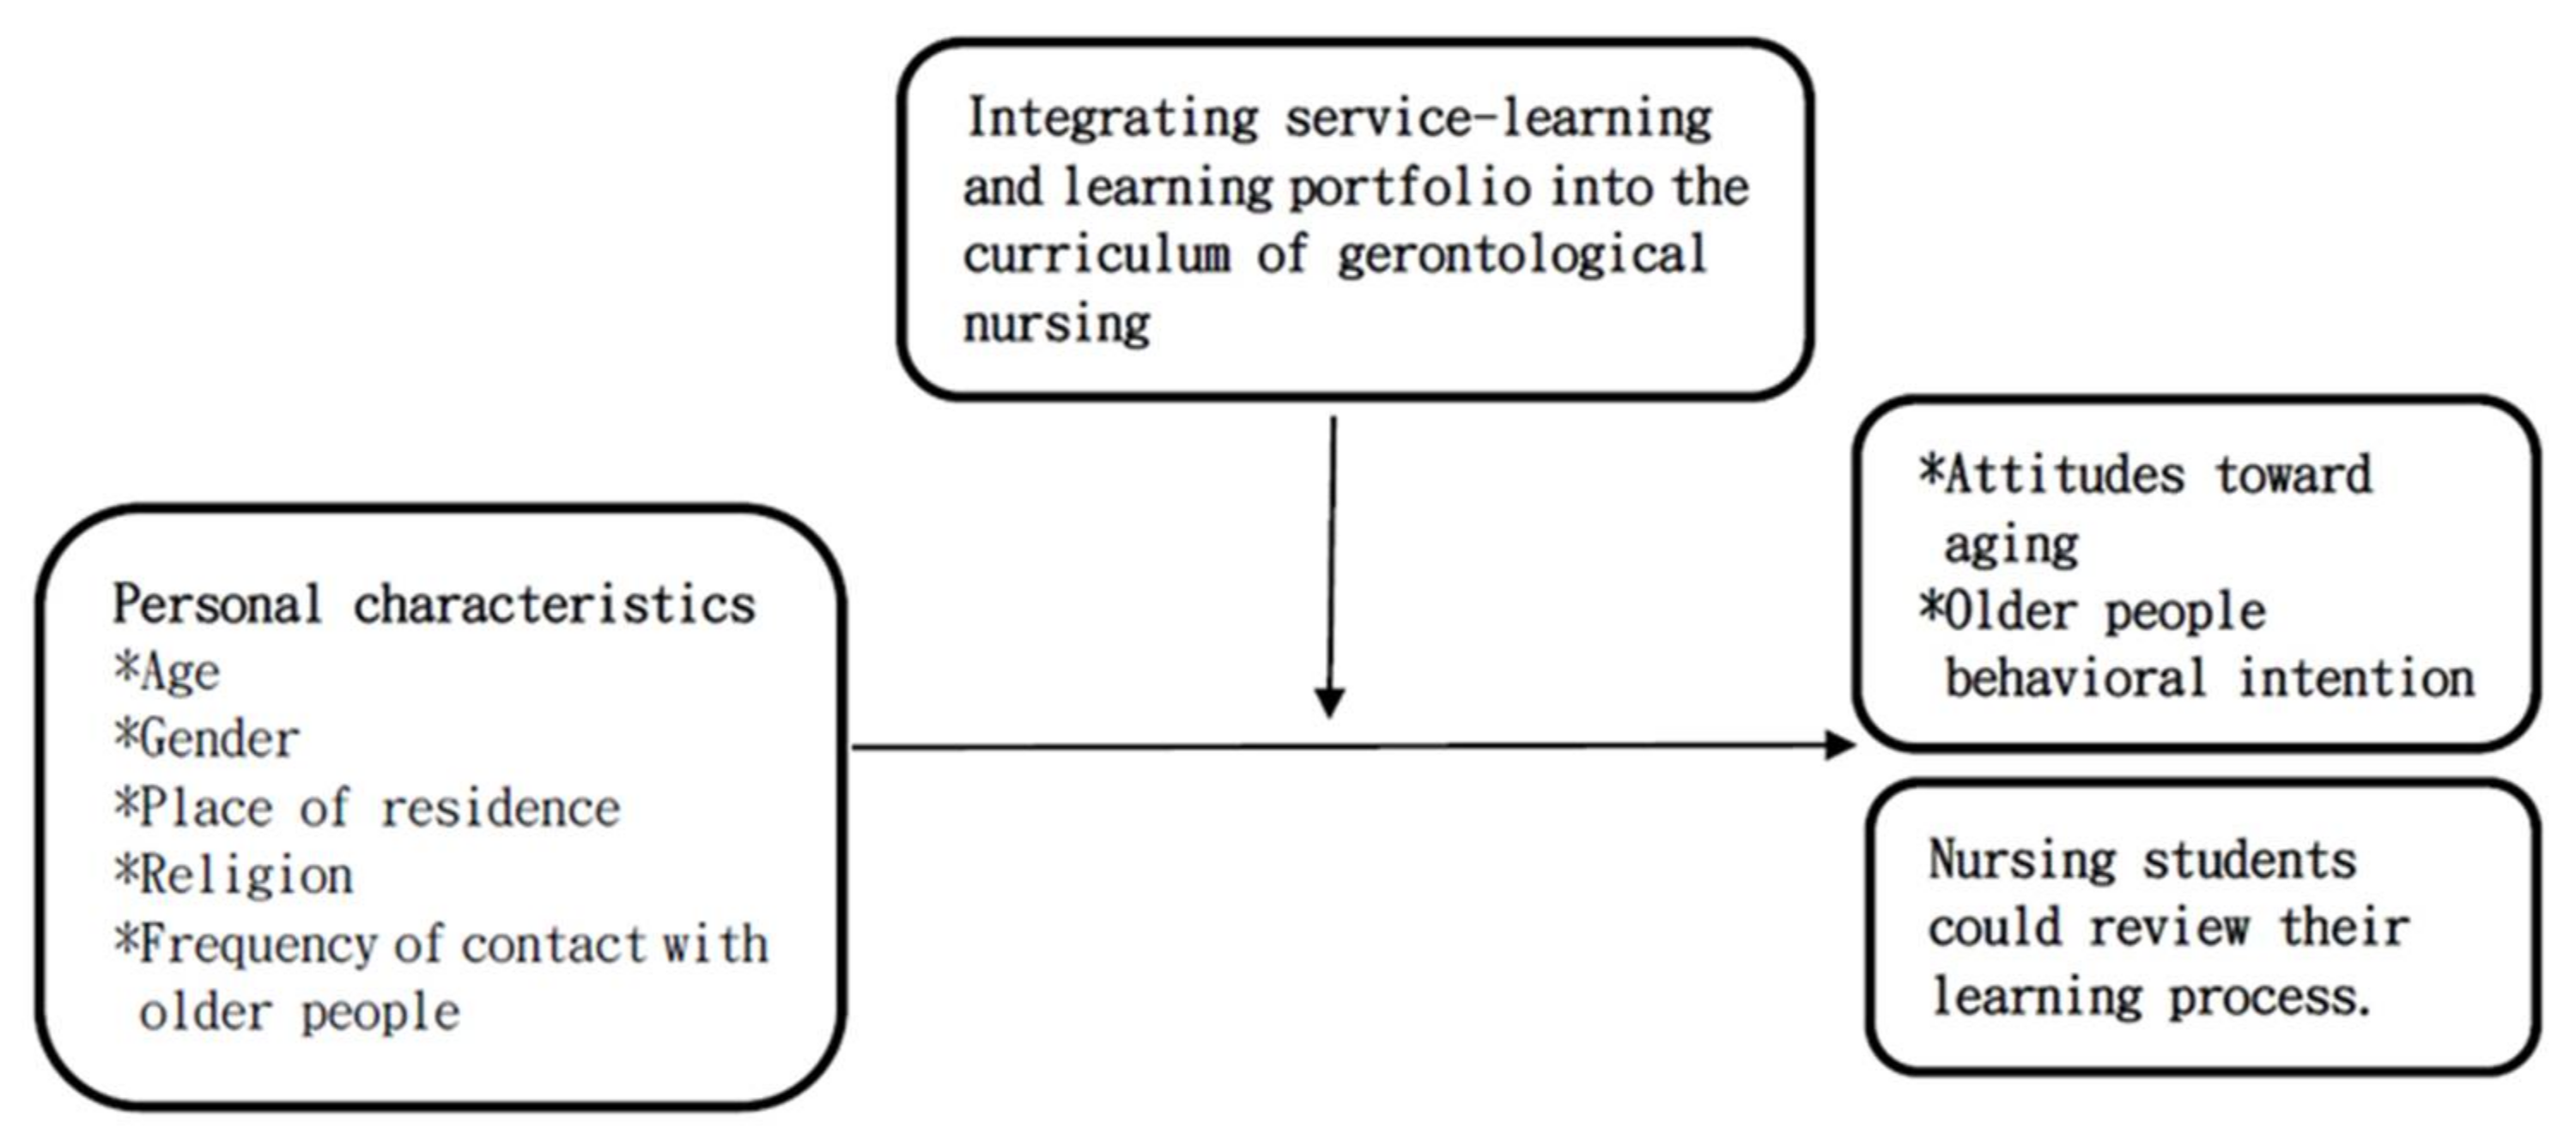 Healthcare Free Full-Text The Effect of Integrating Service-Learning and Learning Portfolio Construction into the Curriculum of Gerontological Nursing photo